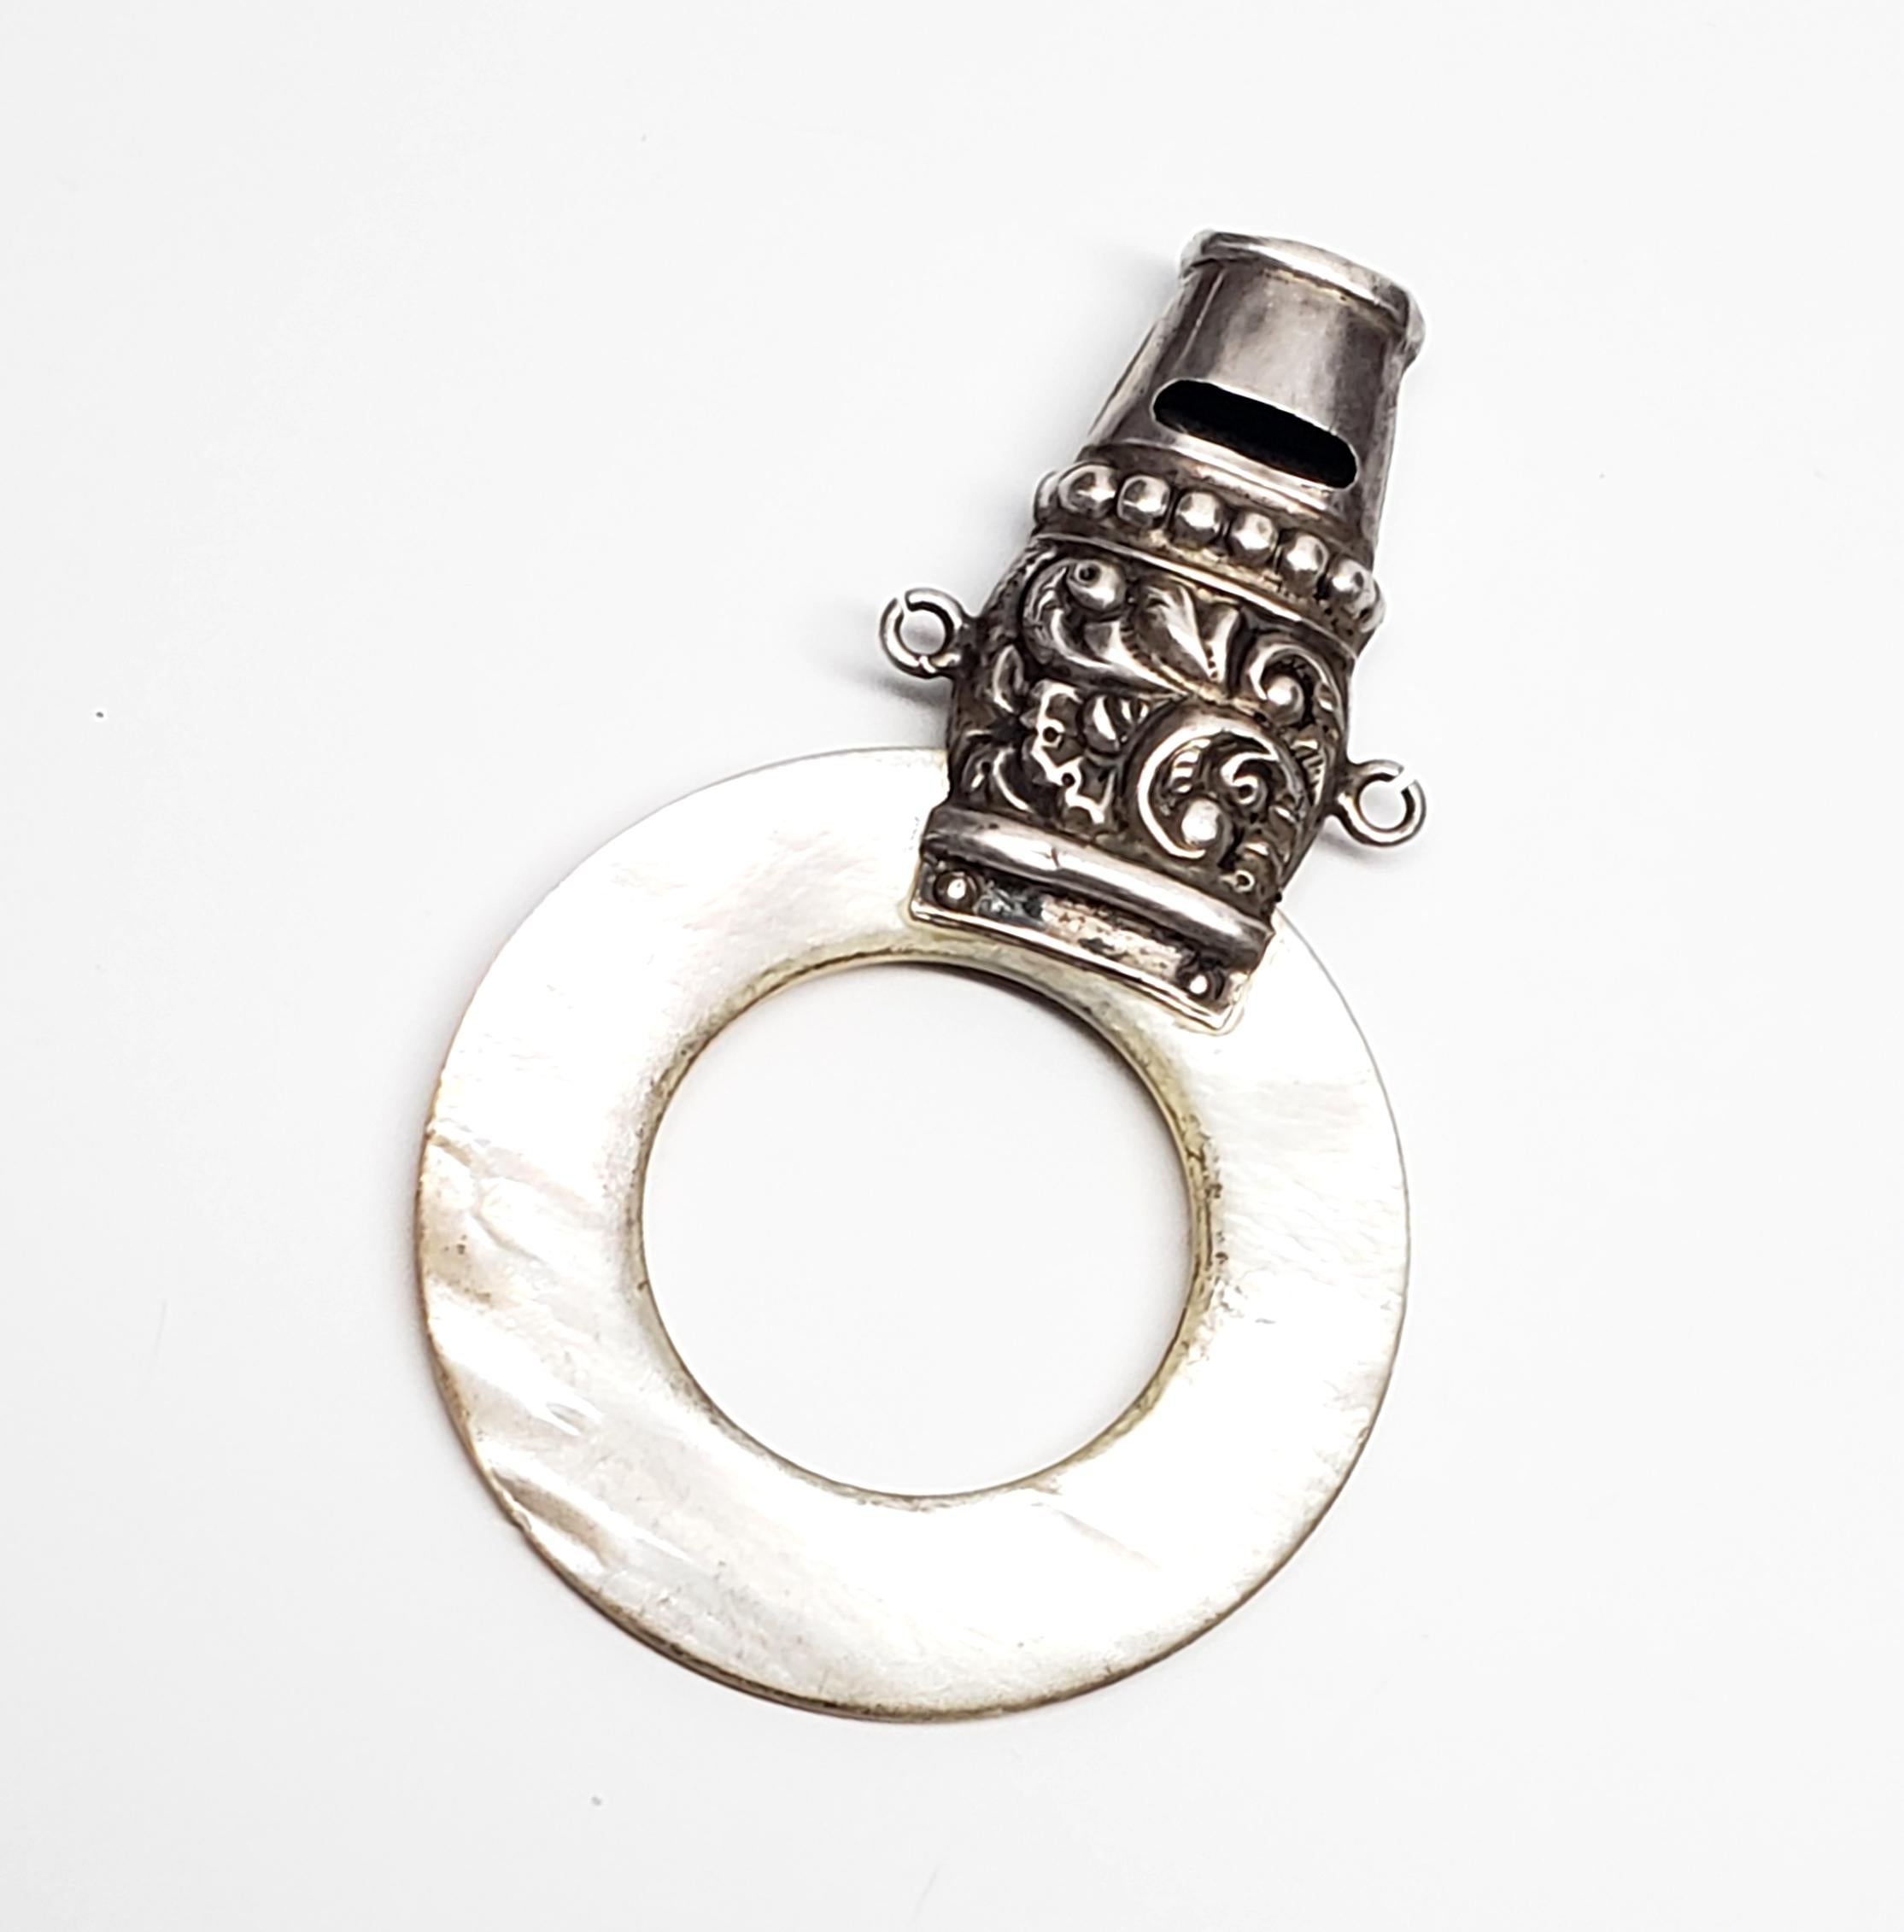 Vintage sterling silver and mother of pearl baby whistle by Webster Co of Attleboro, MA.

Beautiful piece featuring a mother of pearl ring topped with an ornate beaded and scroll design sterling silver whistle.

No monogram.

Measures 2 5/16